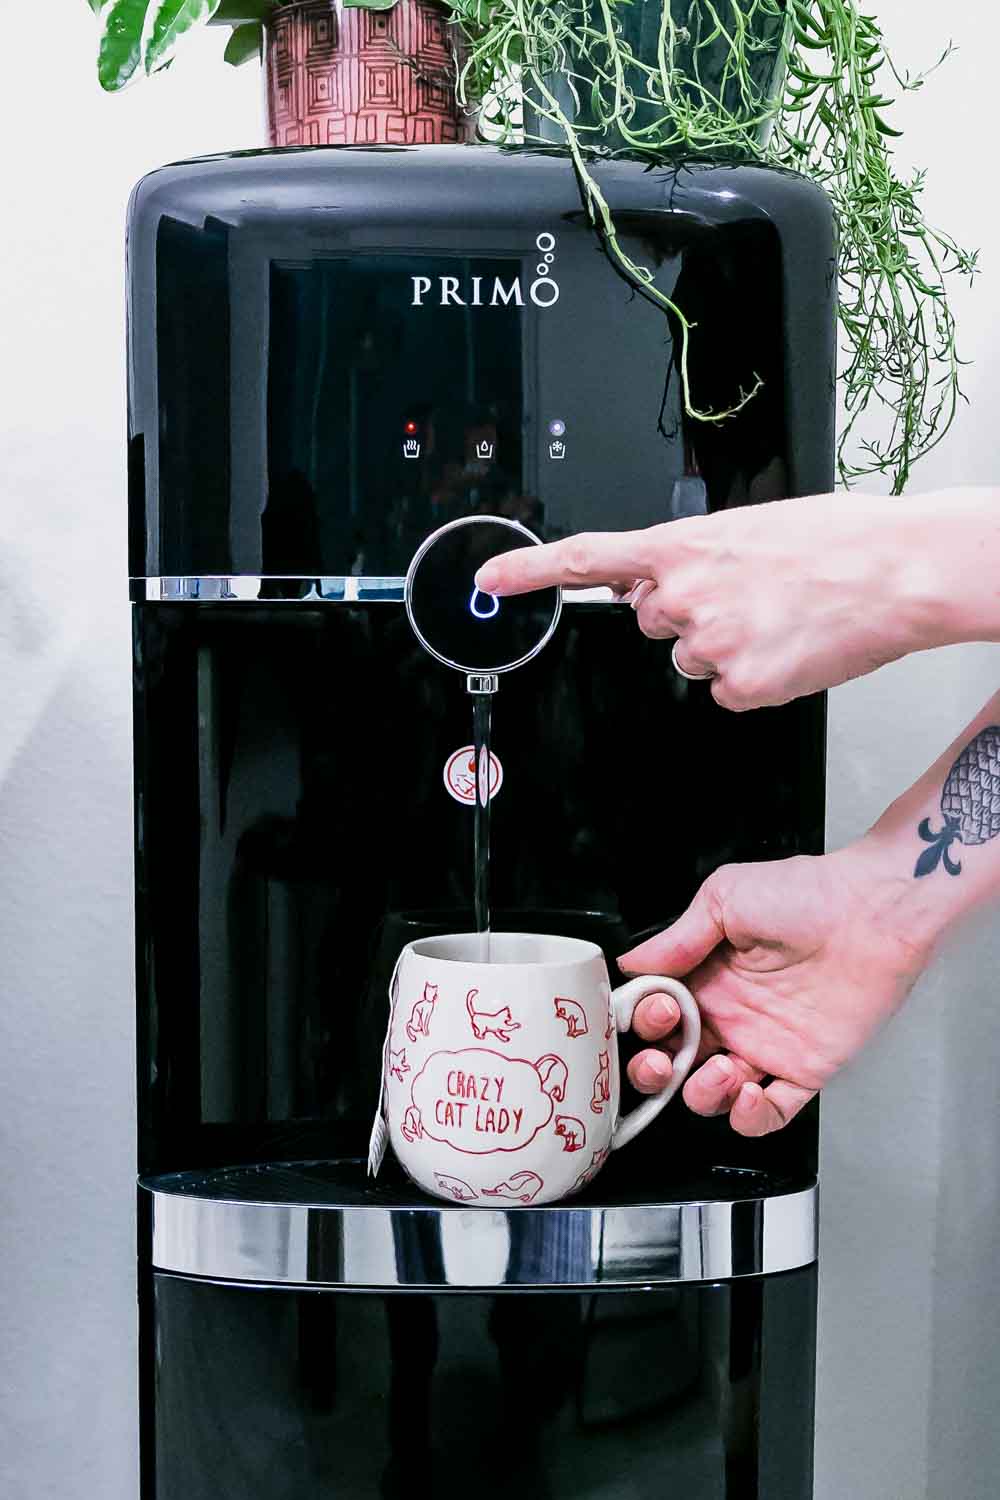 How Primo’s Refillable Water Dispenser Reduced Our Kitchen’s Plastic Waste